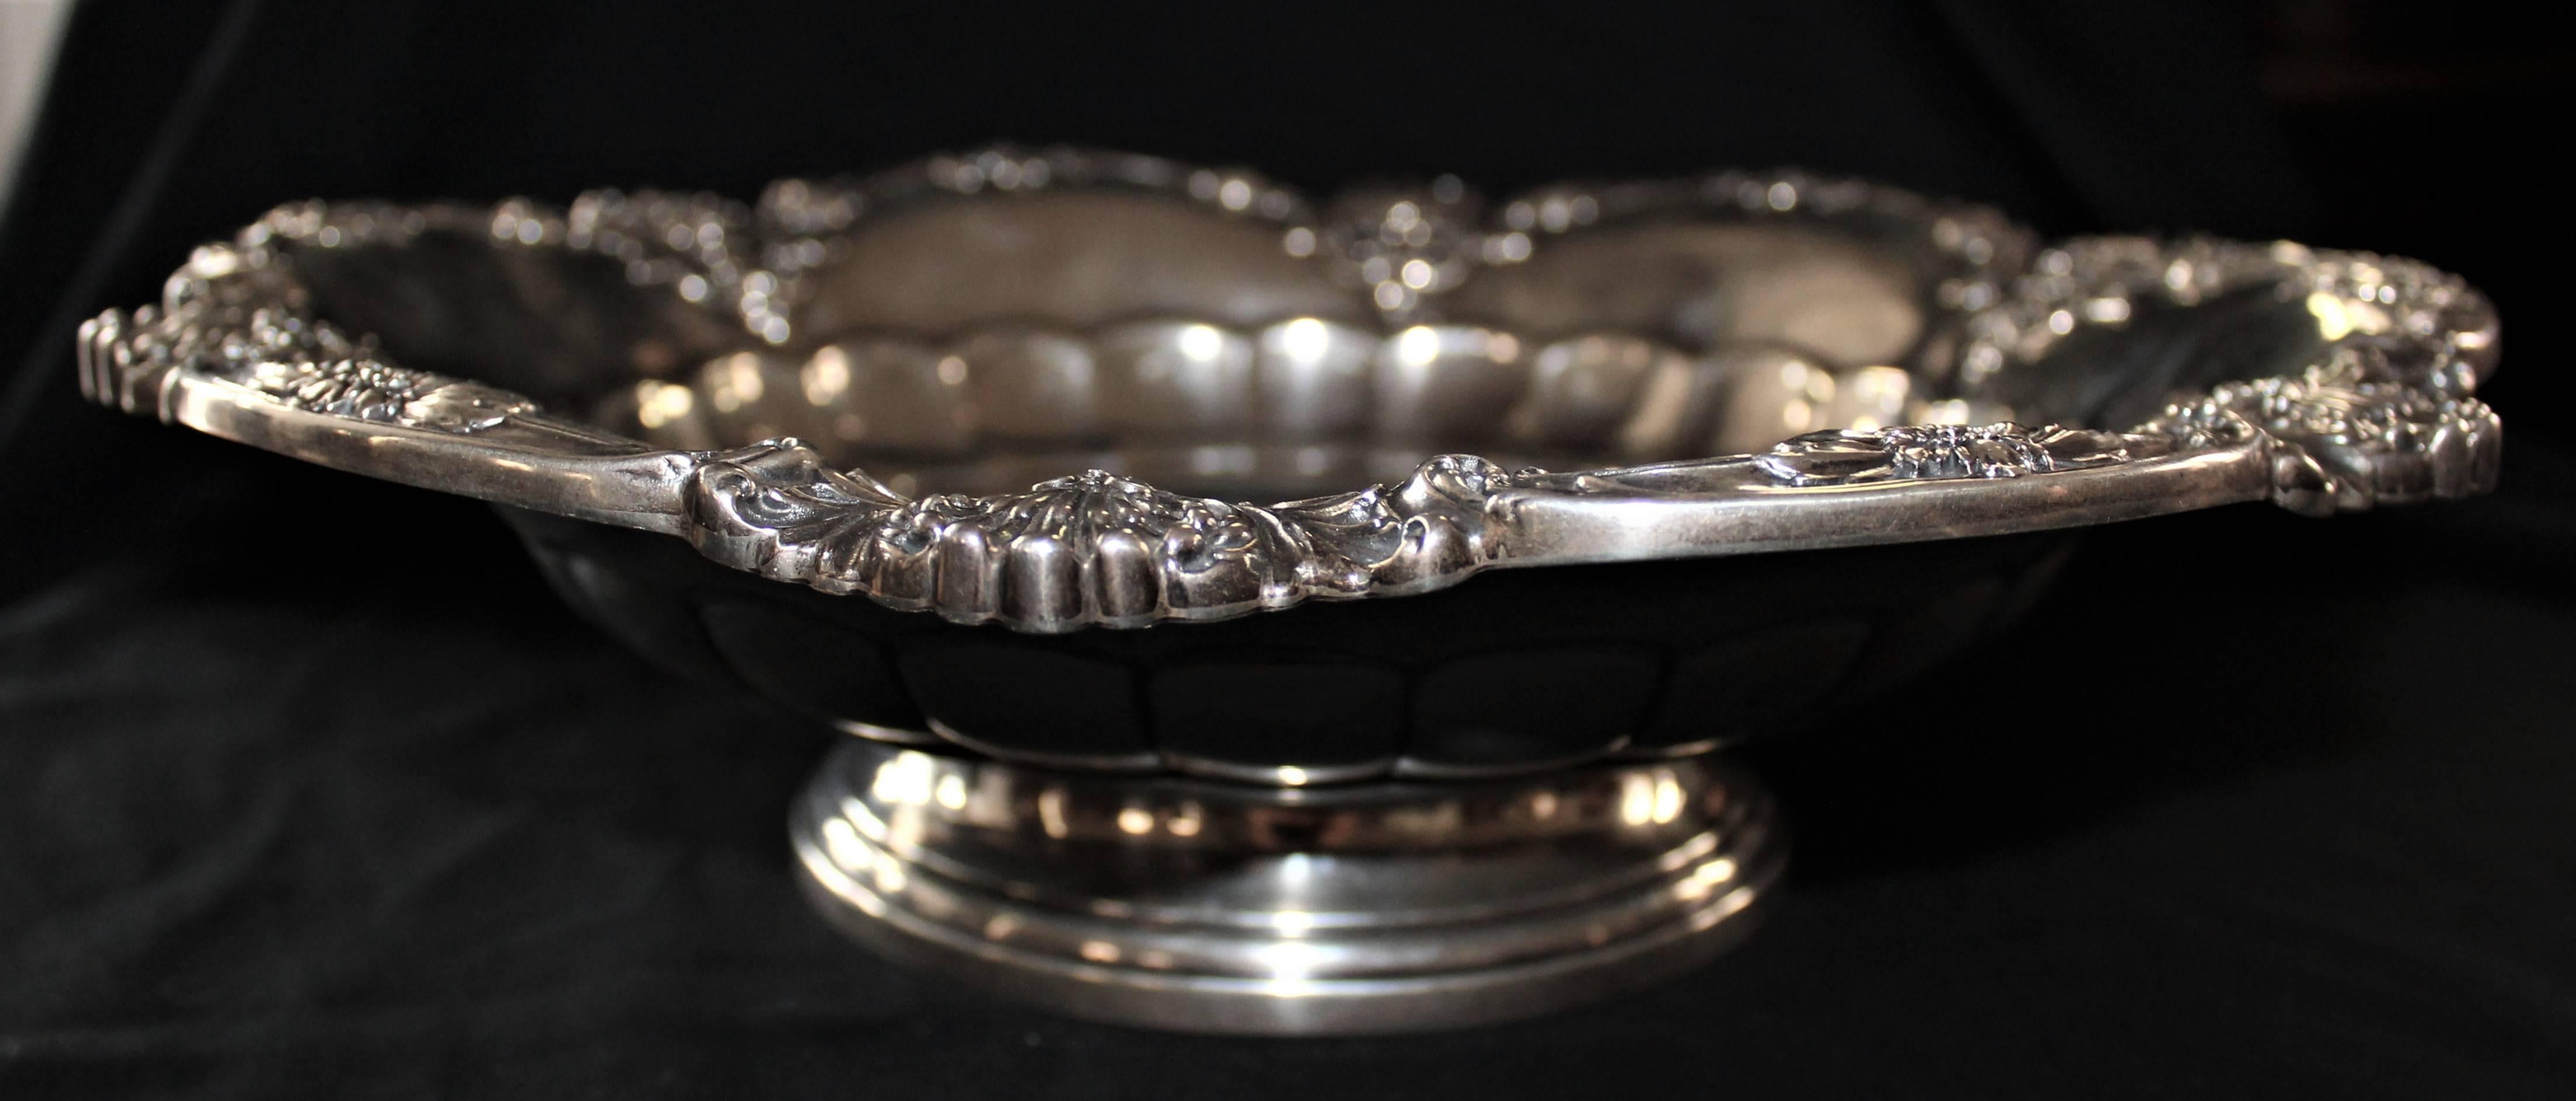 Large Gorham American silver shell chased bowl sterling. Weighs 1050 grams.

Gorham Silver was founded in Providence, Rhode Island, 1831 by Jabez Gorham, a master craftsman, in partnership with Henry L. Webster. The firm's chief product was spoons